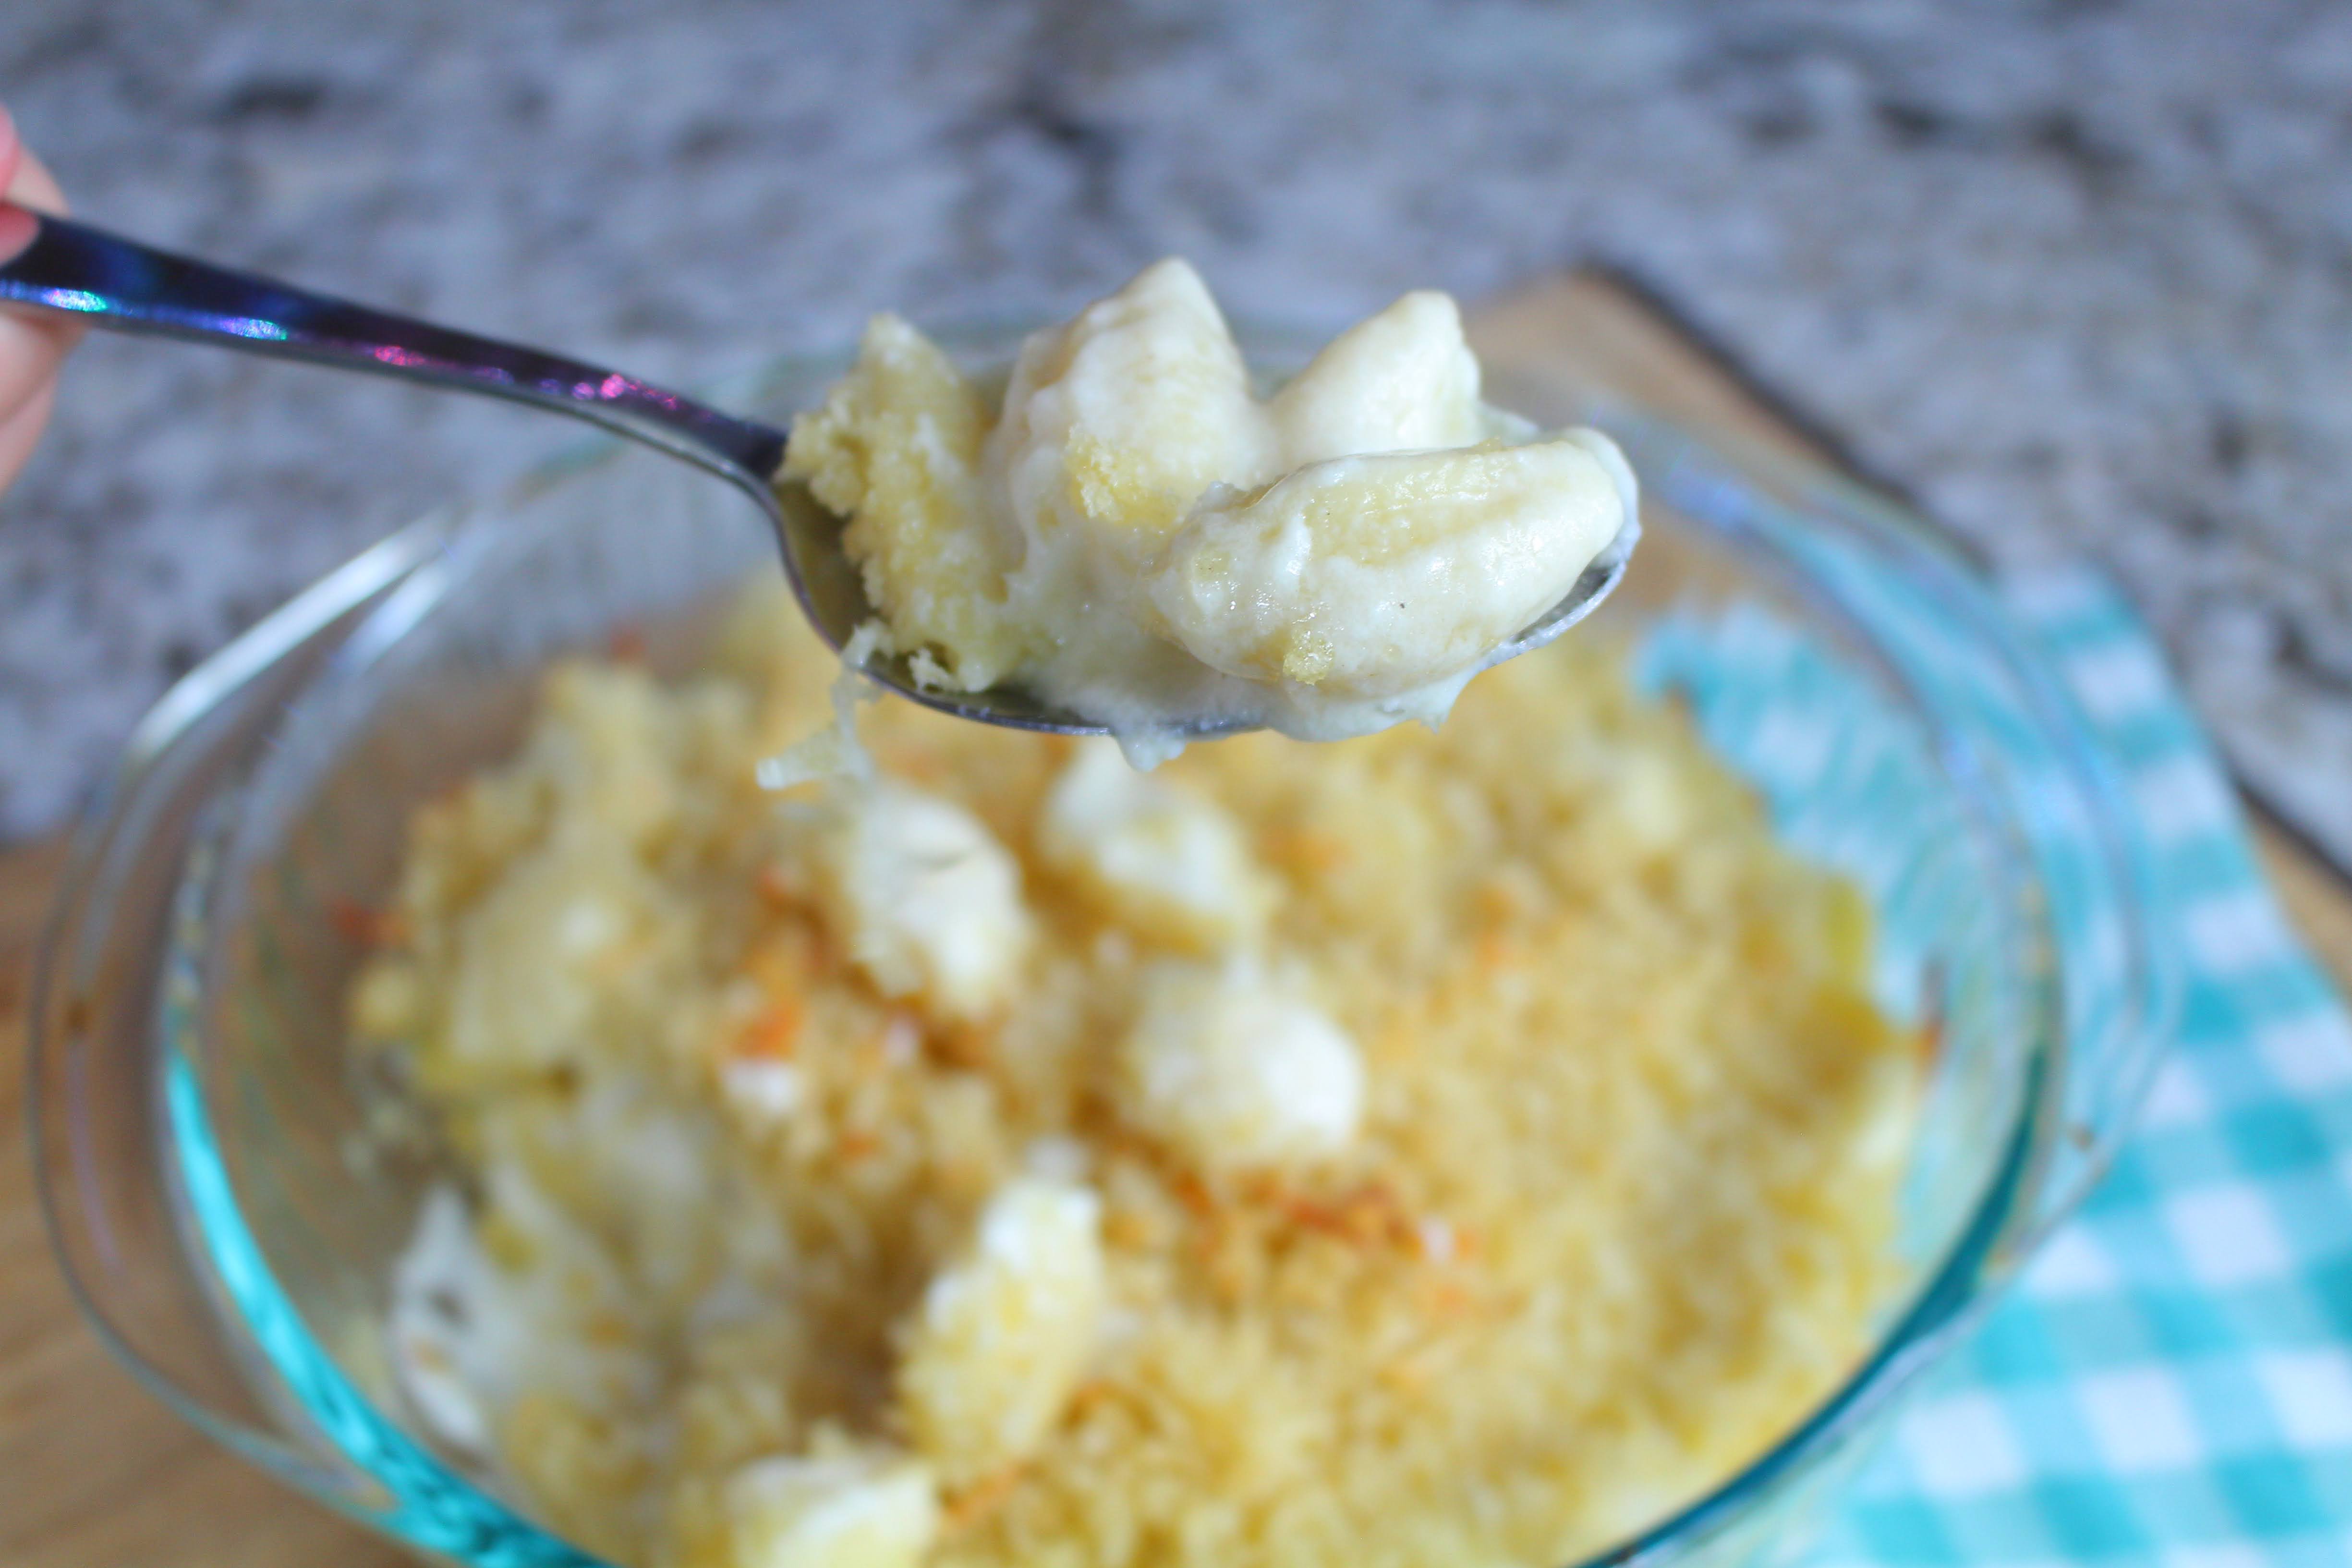 the little mermaid party food for the little mermaid movie night - Mac and Cheese Shells